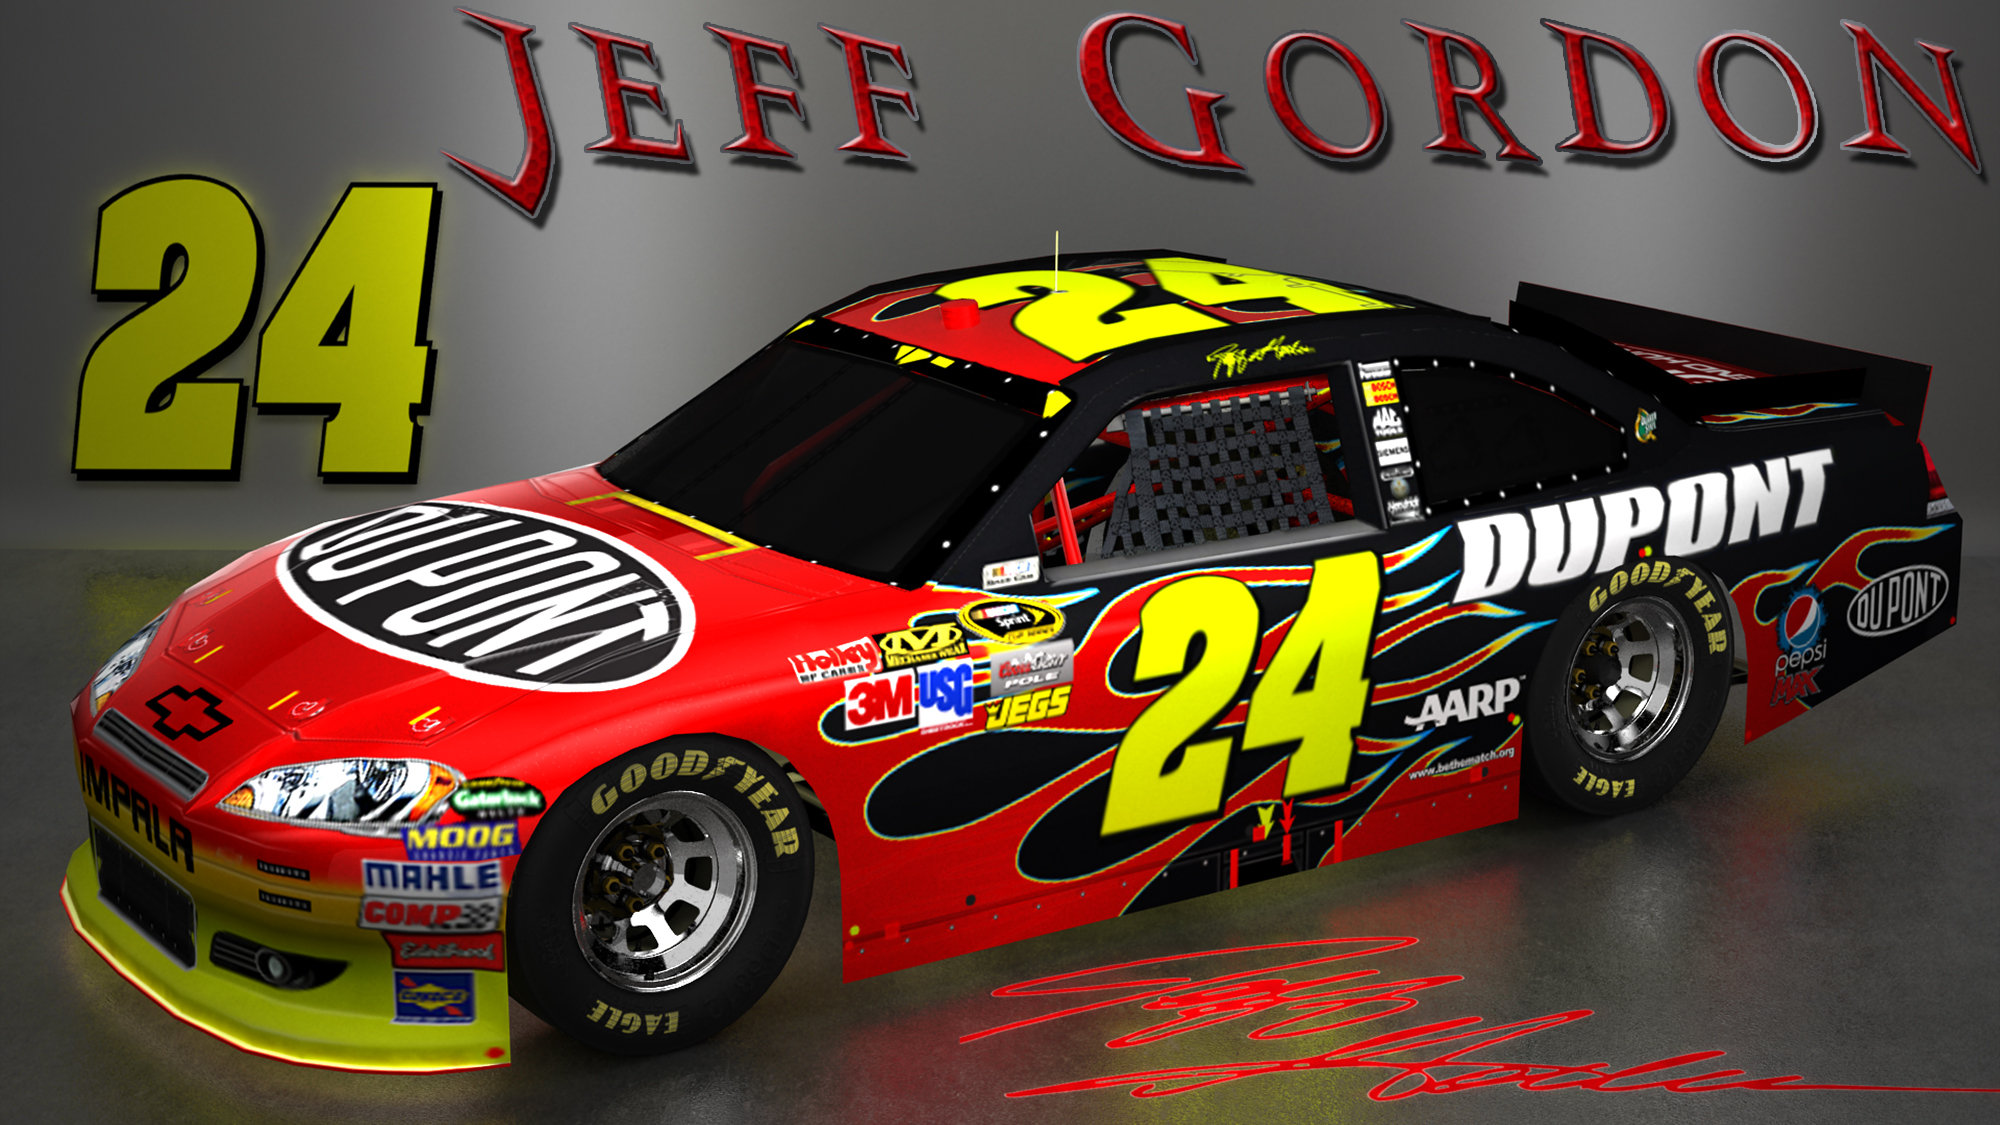 Wallpapers By Wicked Shadows Jeff Gordon NASCAR Signature Wallpaper